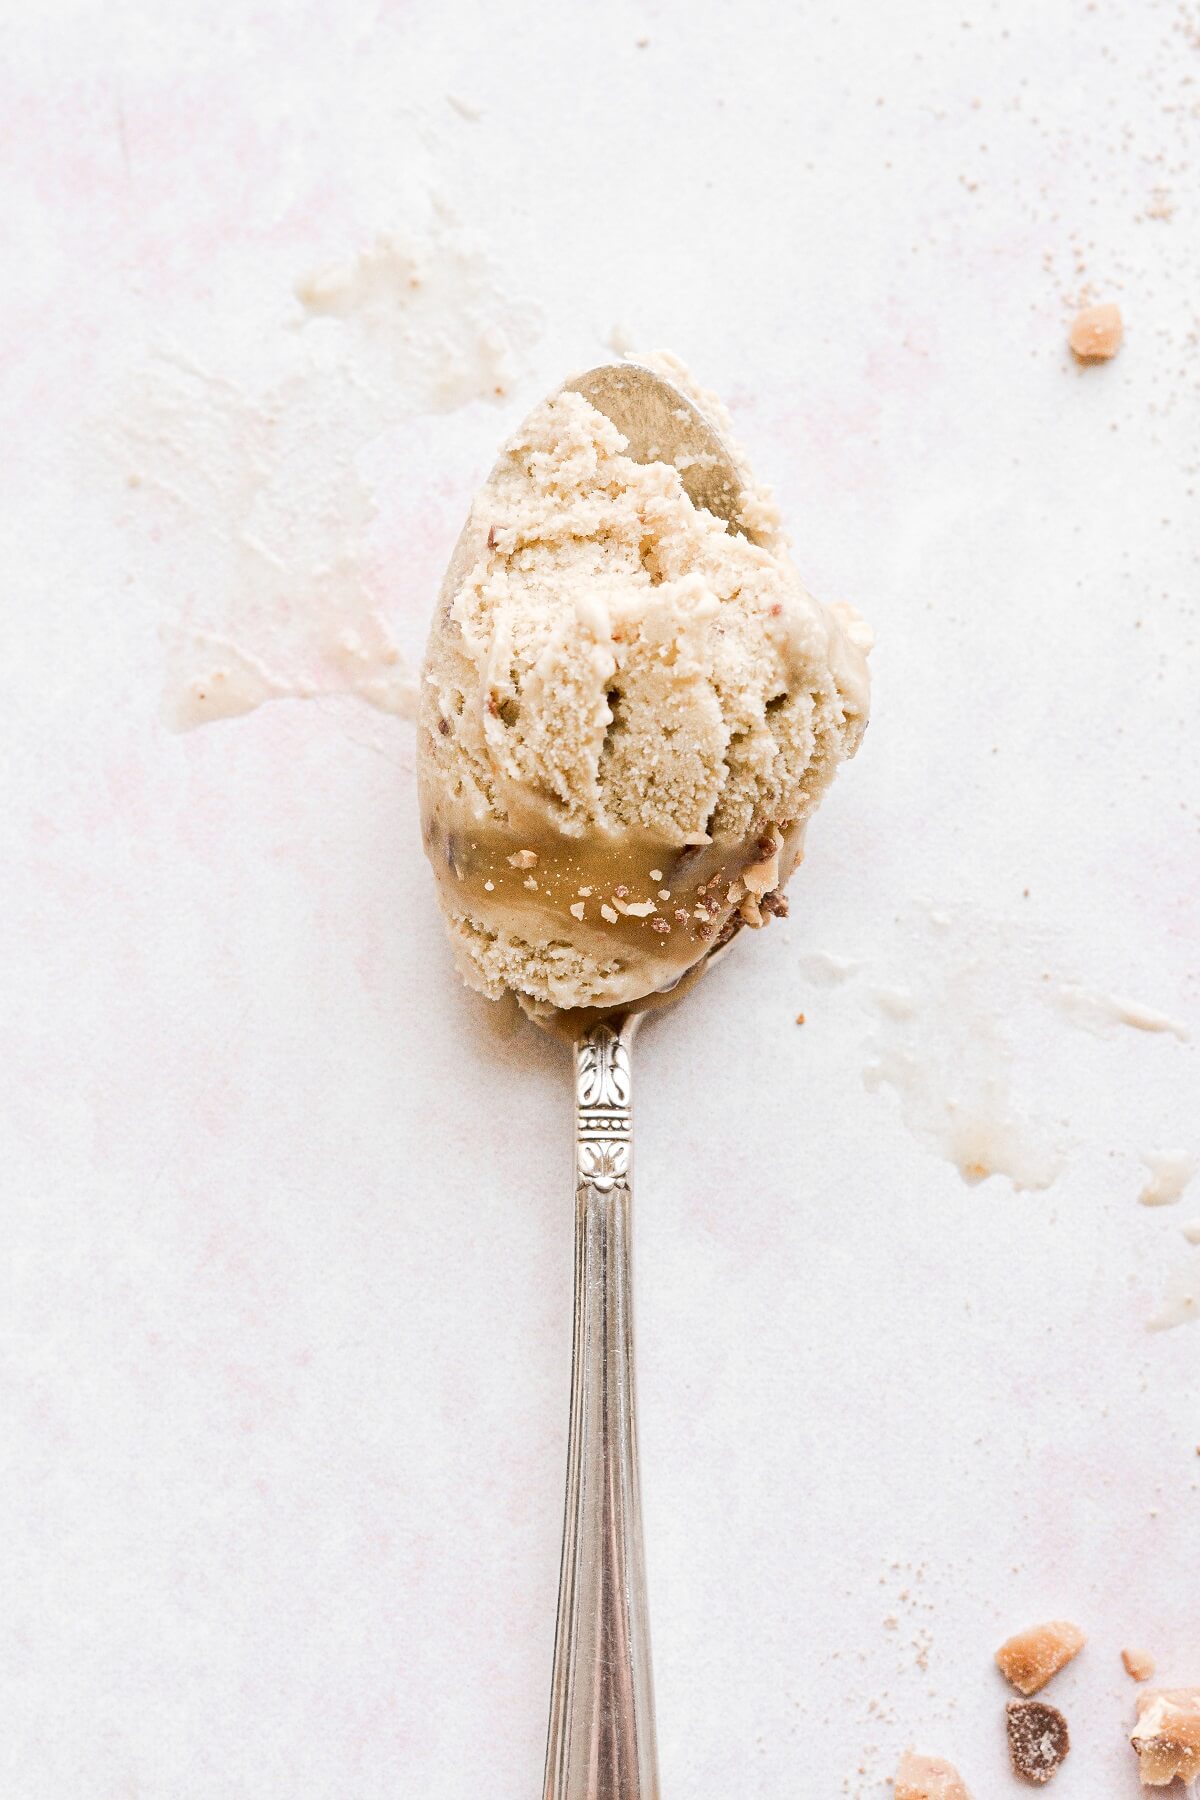 A spoonful of caramelized banana ice cream.